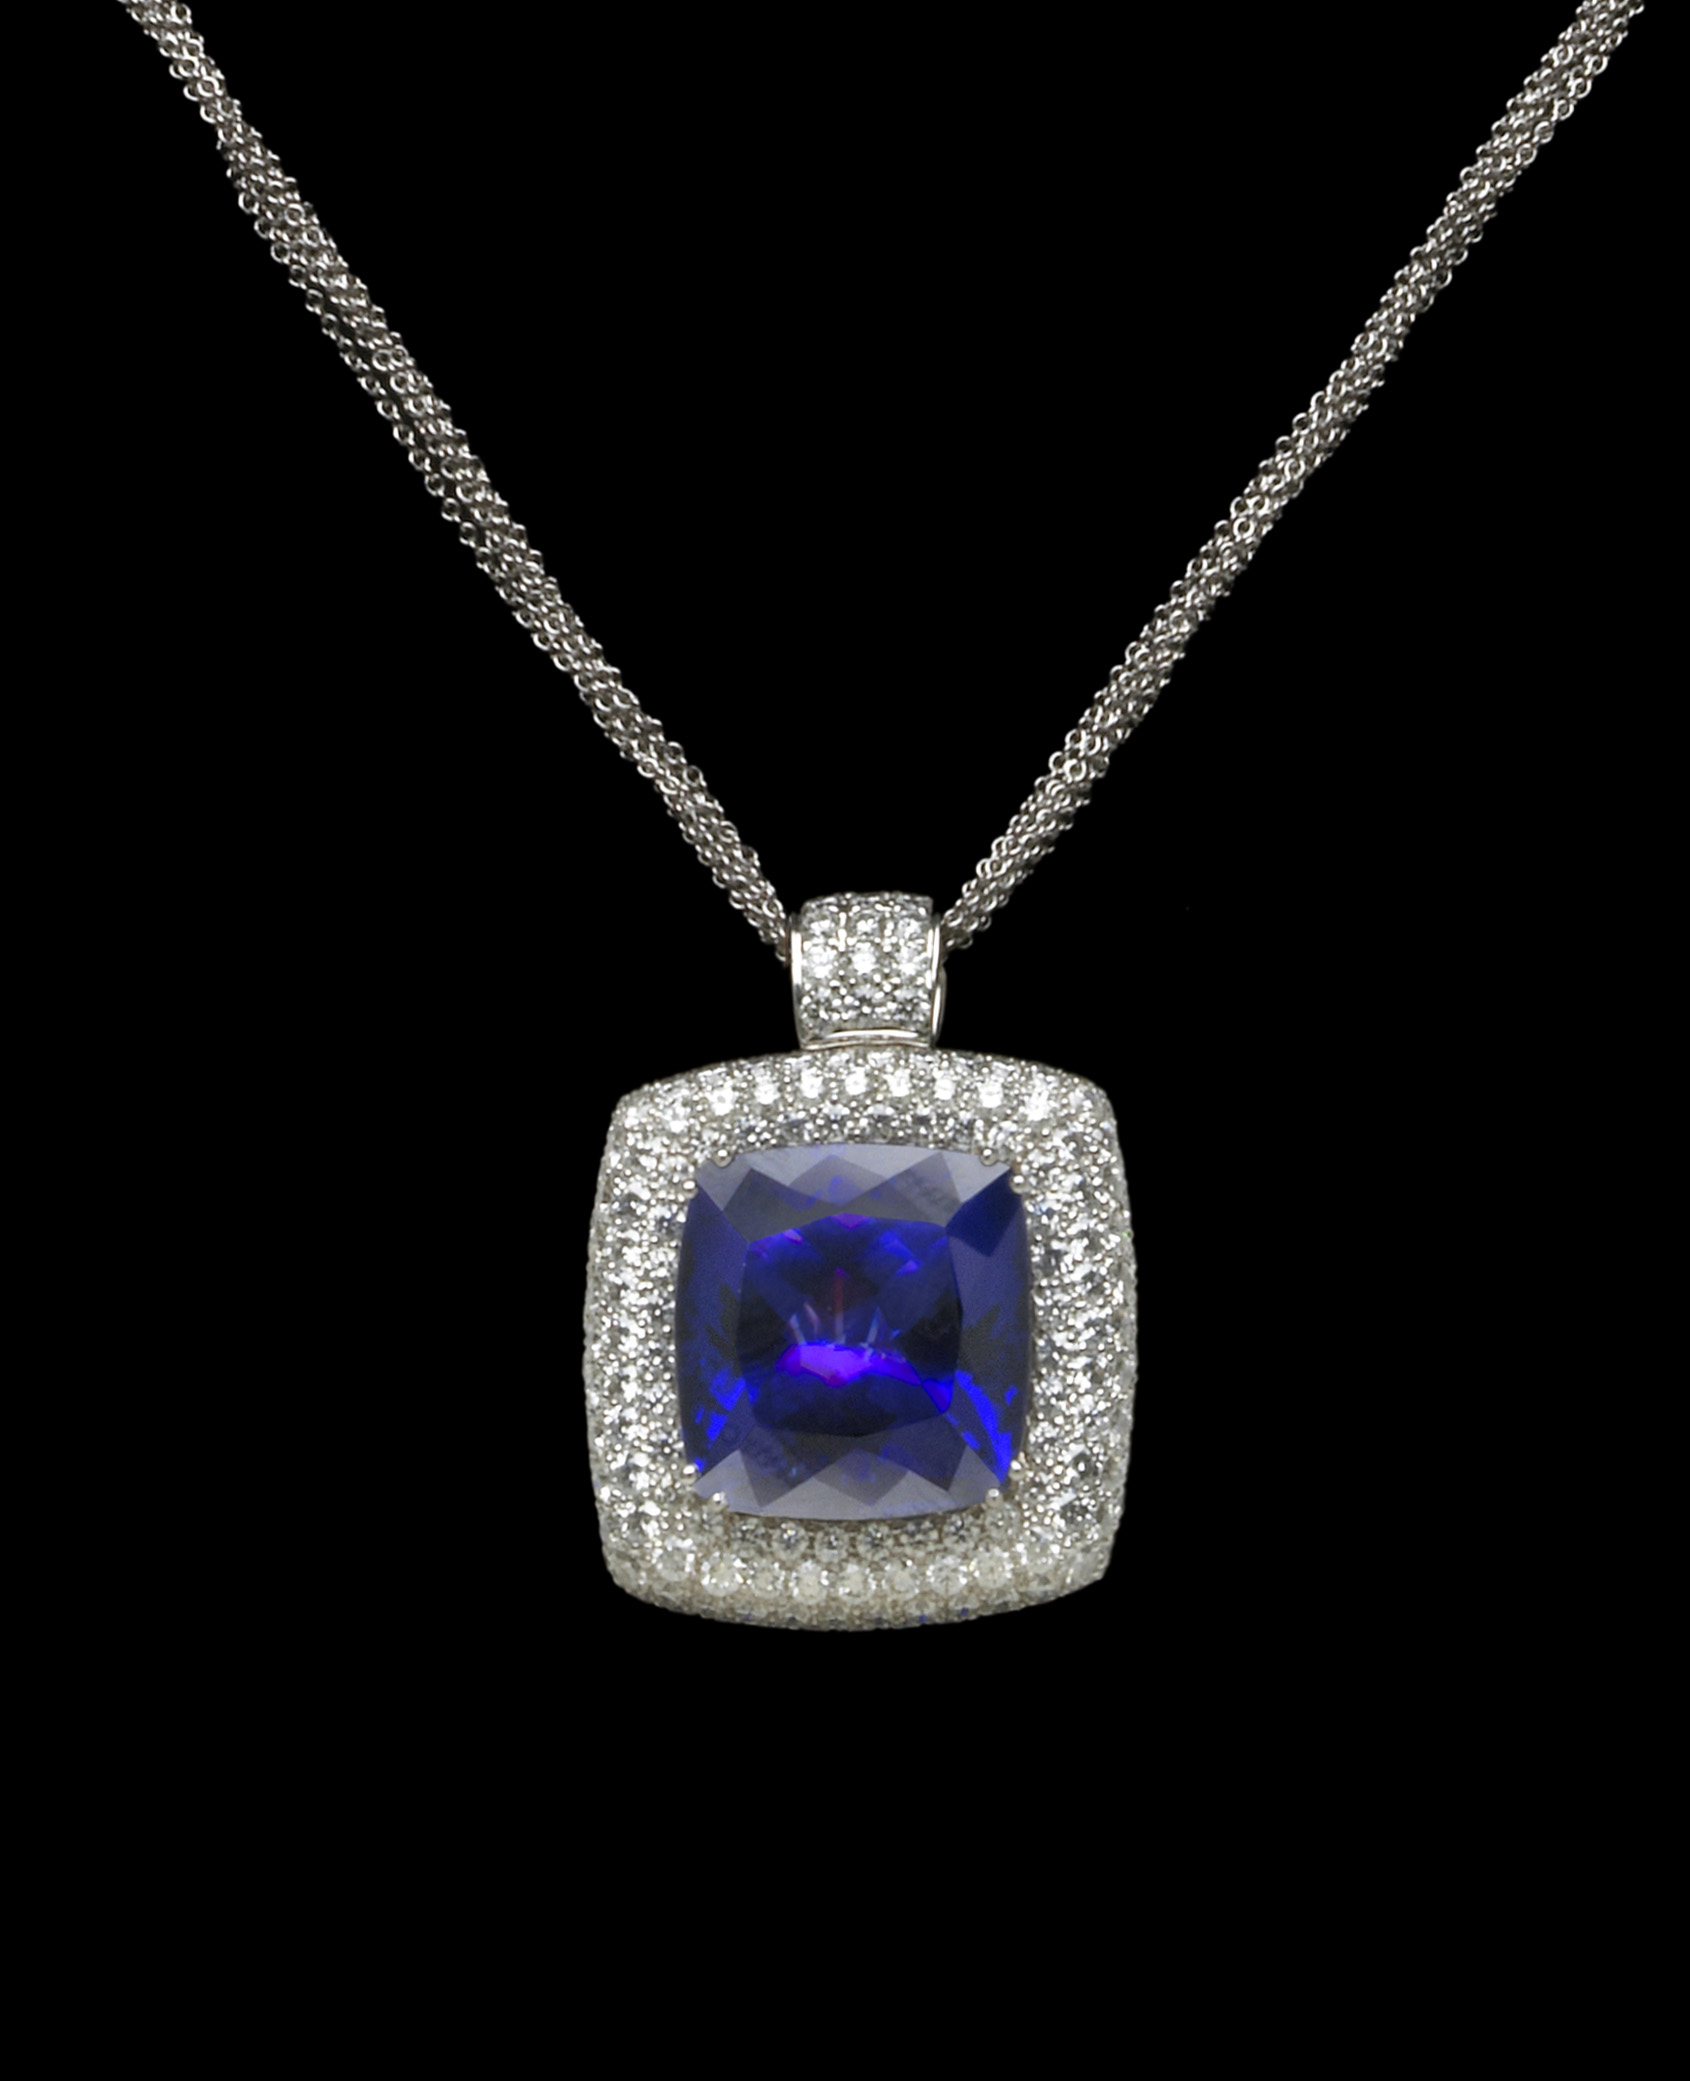 A Tanzanite necklace with a blue 37-carat rounded square brilliant-cut tanzanite surrounded by Diamonds and set in 18-karat white Gold. Pendant measures 27 mm in diameter.